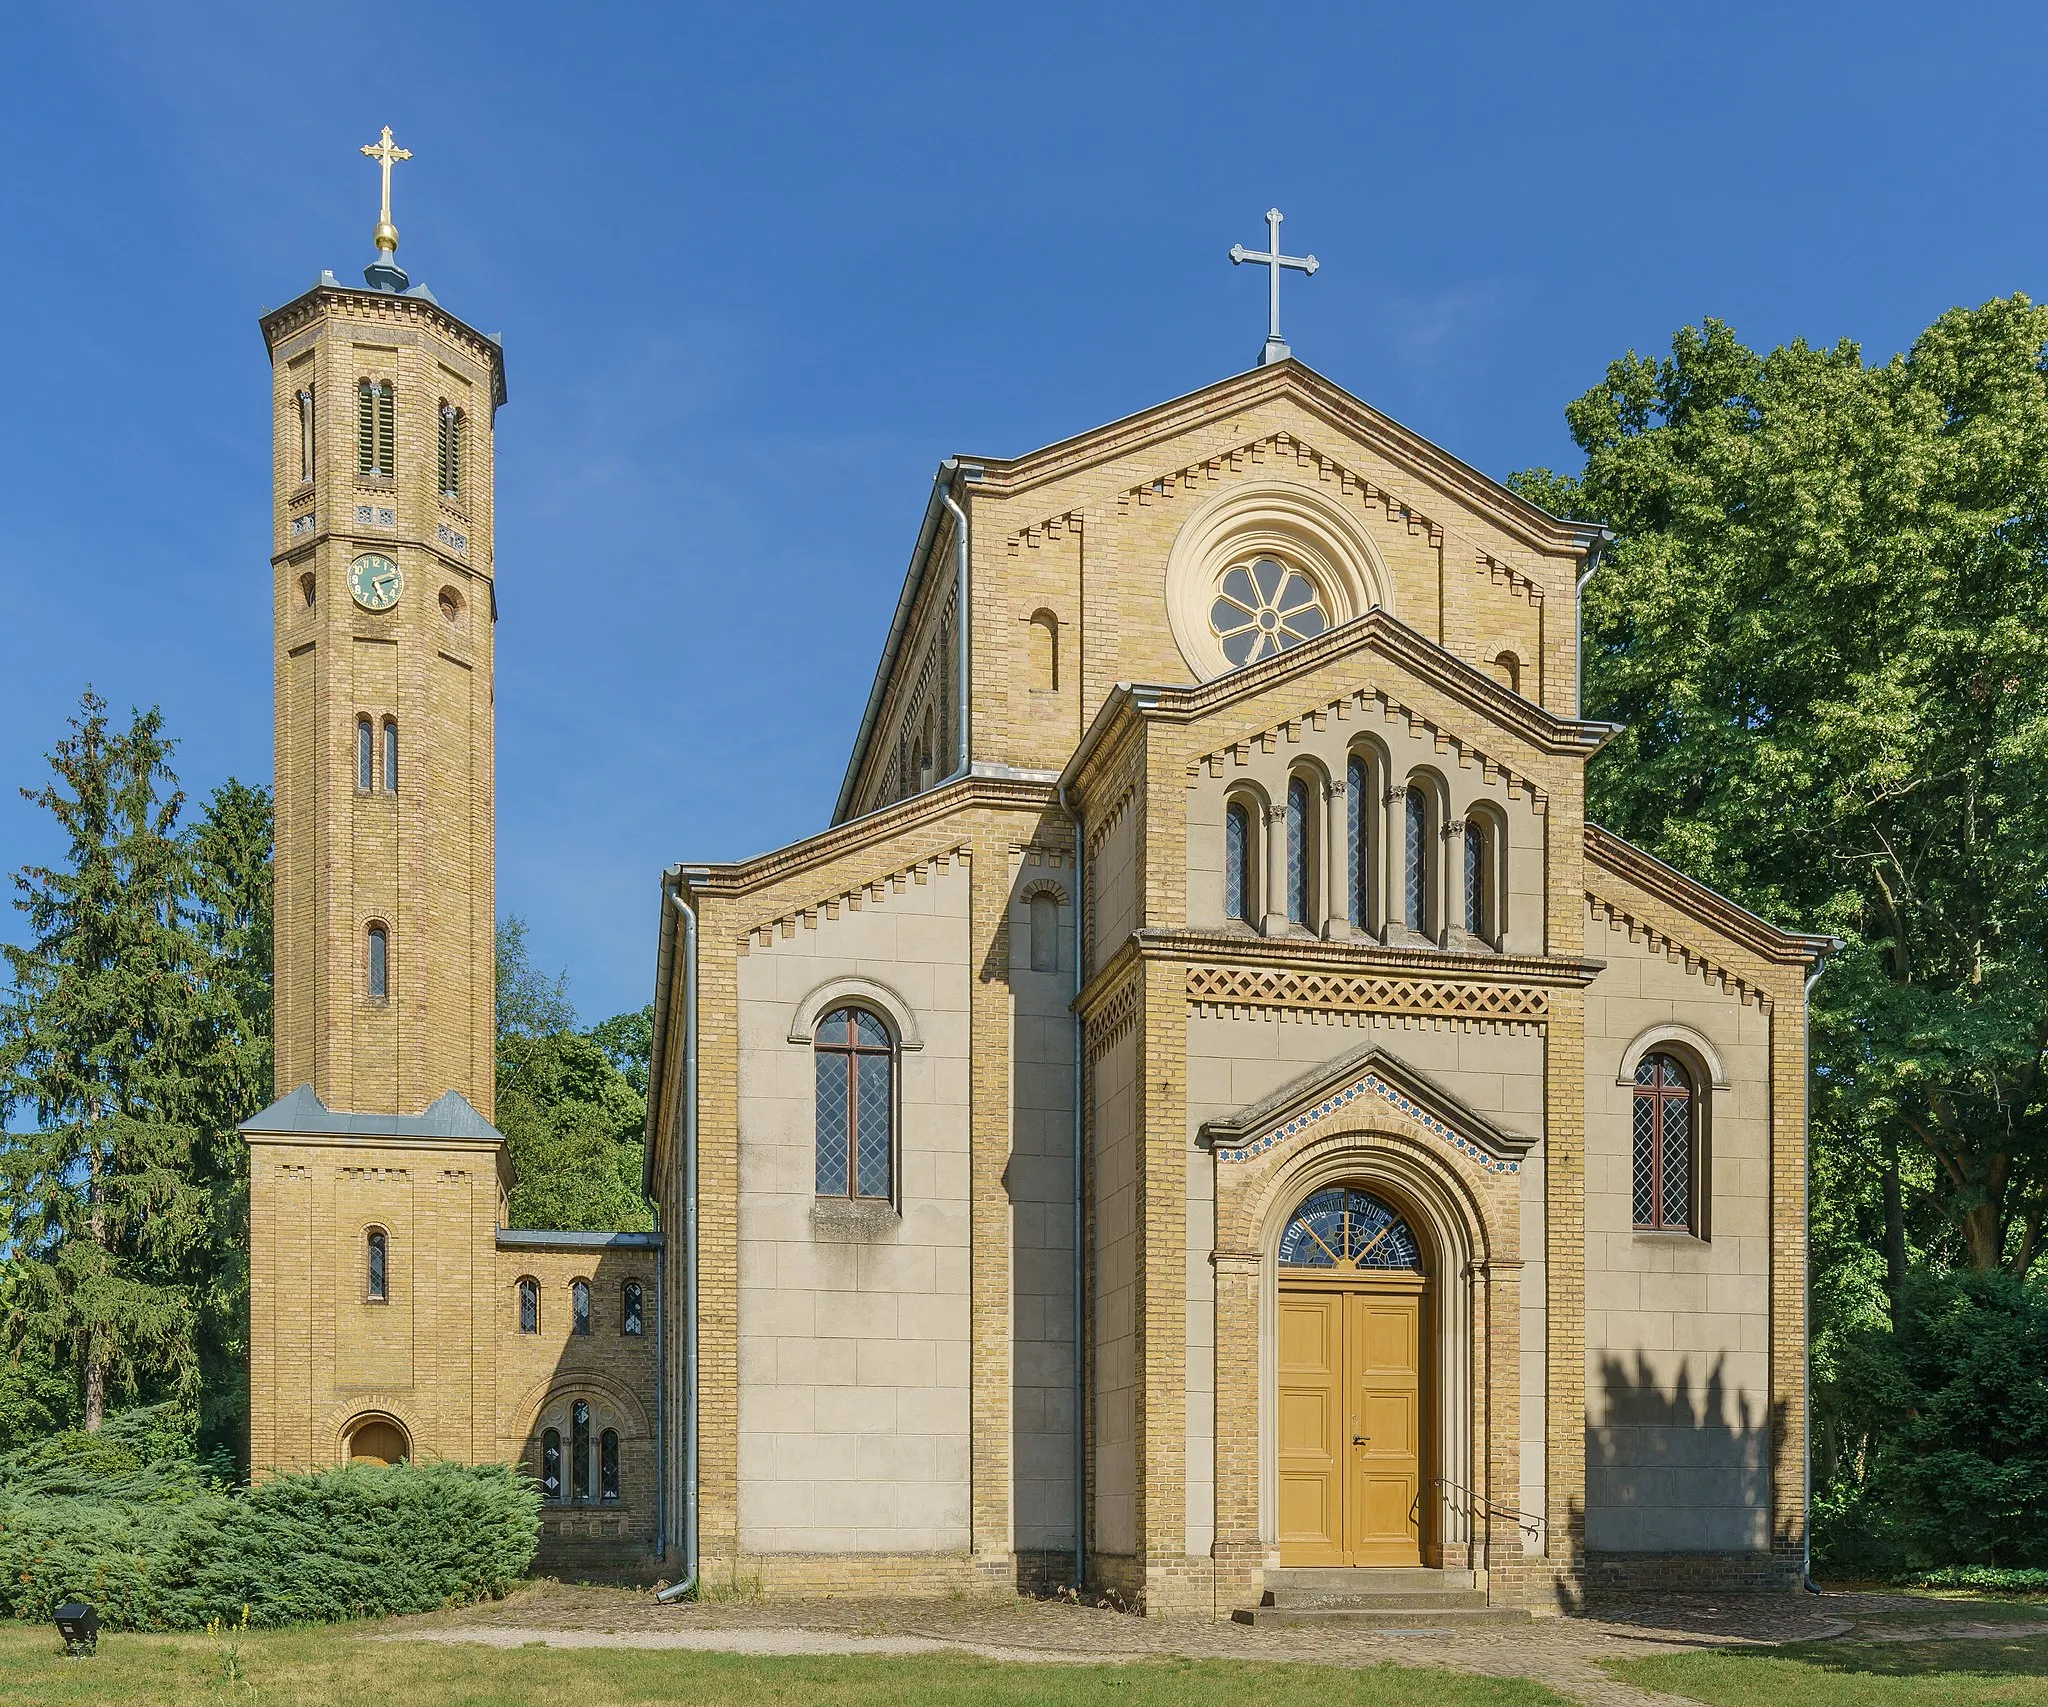 Photo showing: Village church in Caputh (Schwielowsee) near Potsdam, Germany